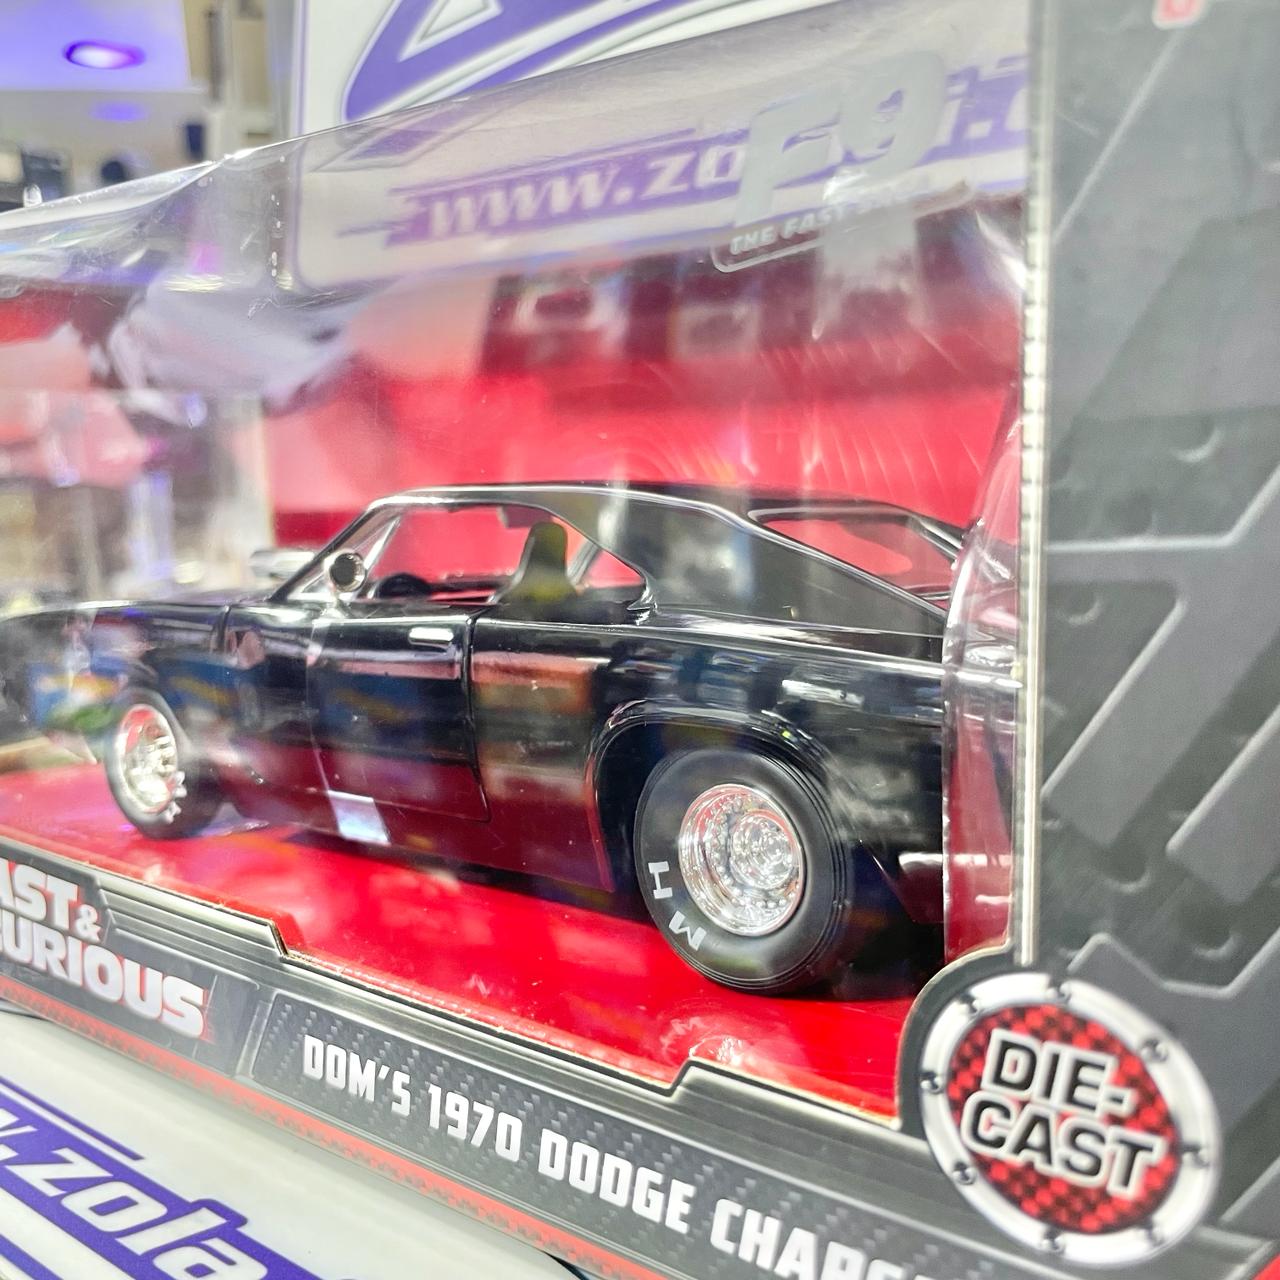 Fast&Furious DODGE CHARGUER #31942